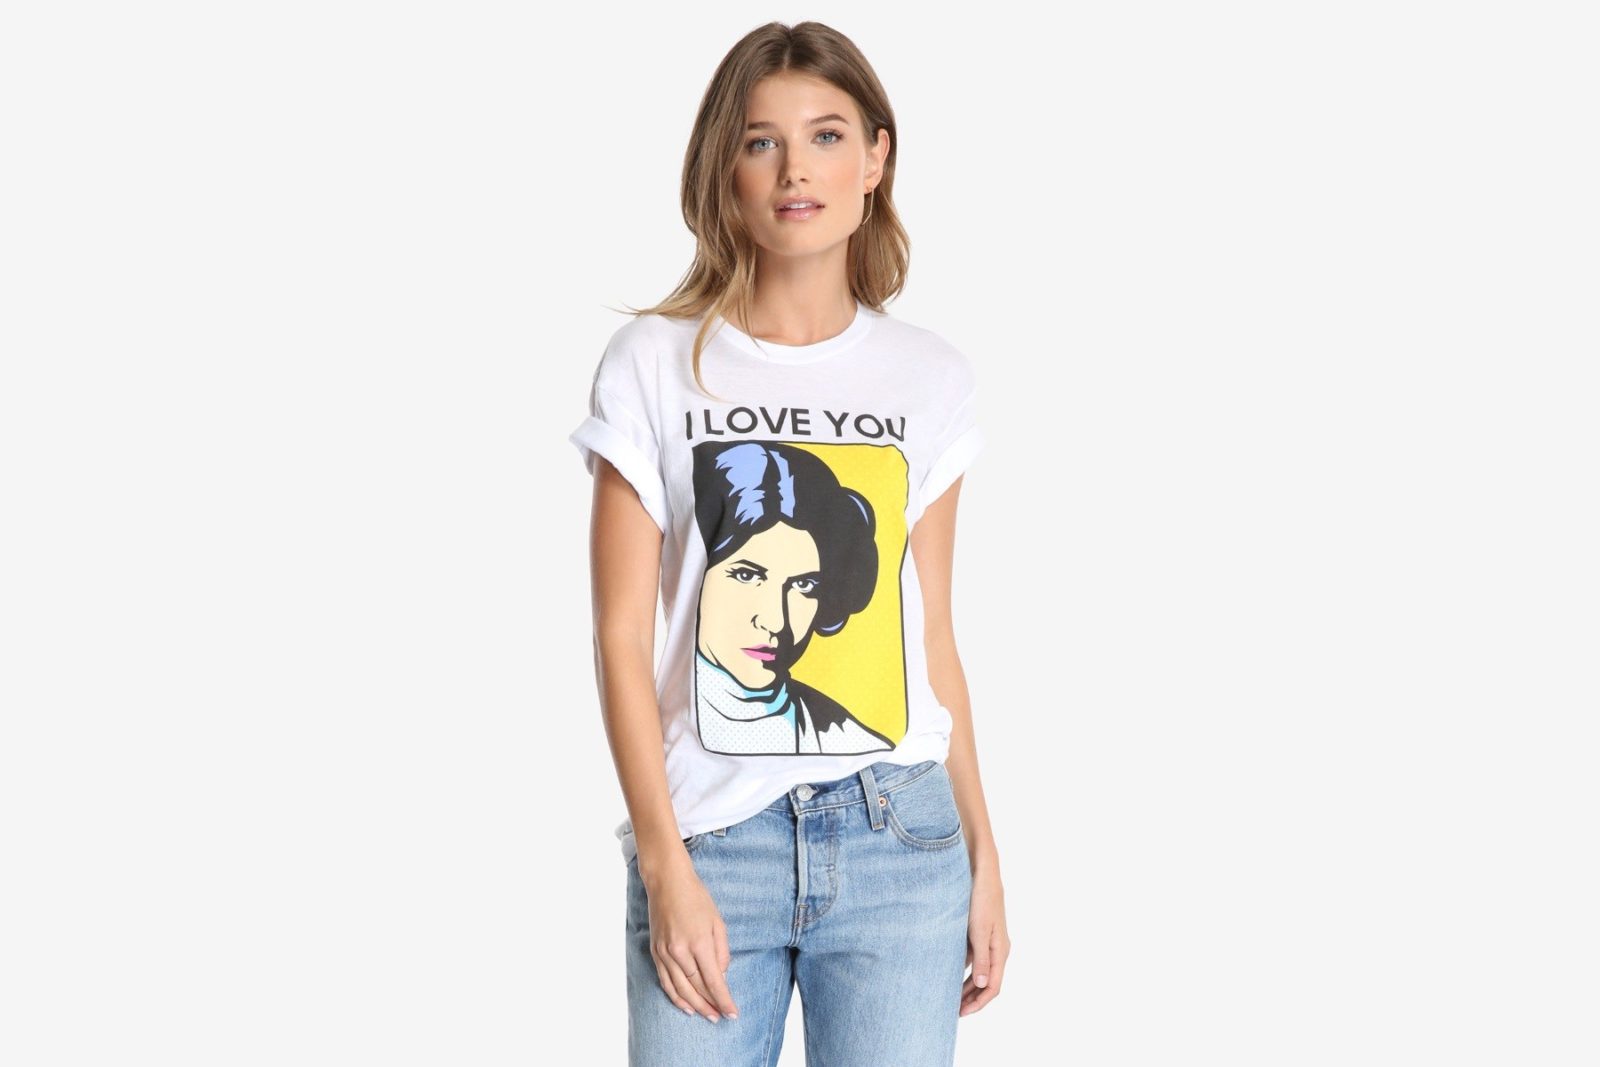 Women's Princess Leia 'I Love You' t-shirt available at Box Lunch